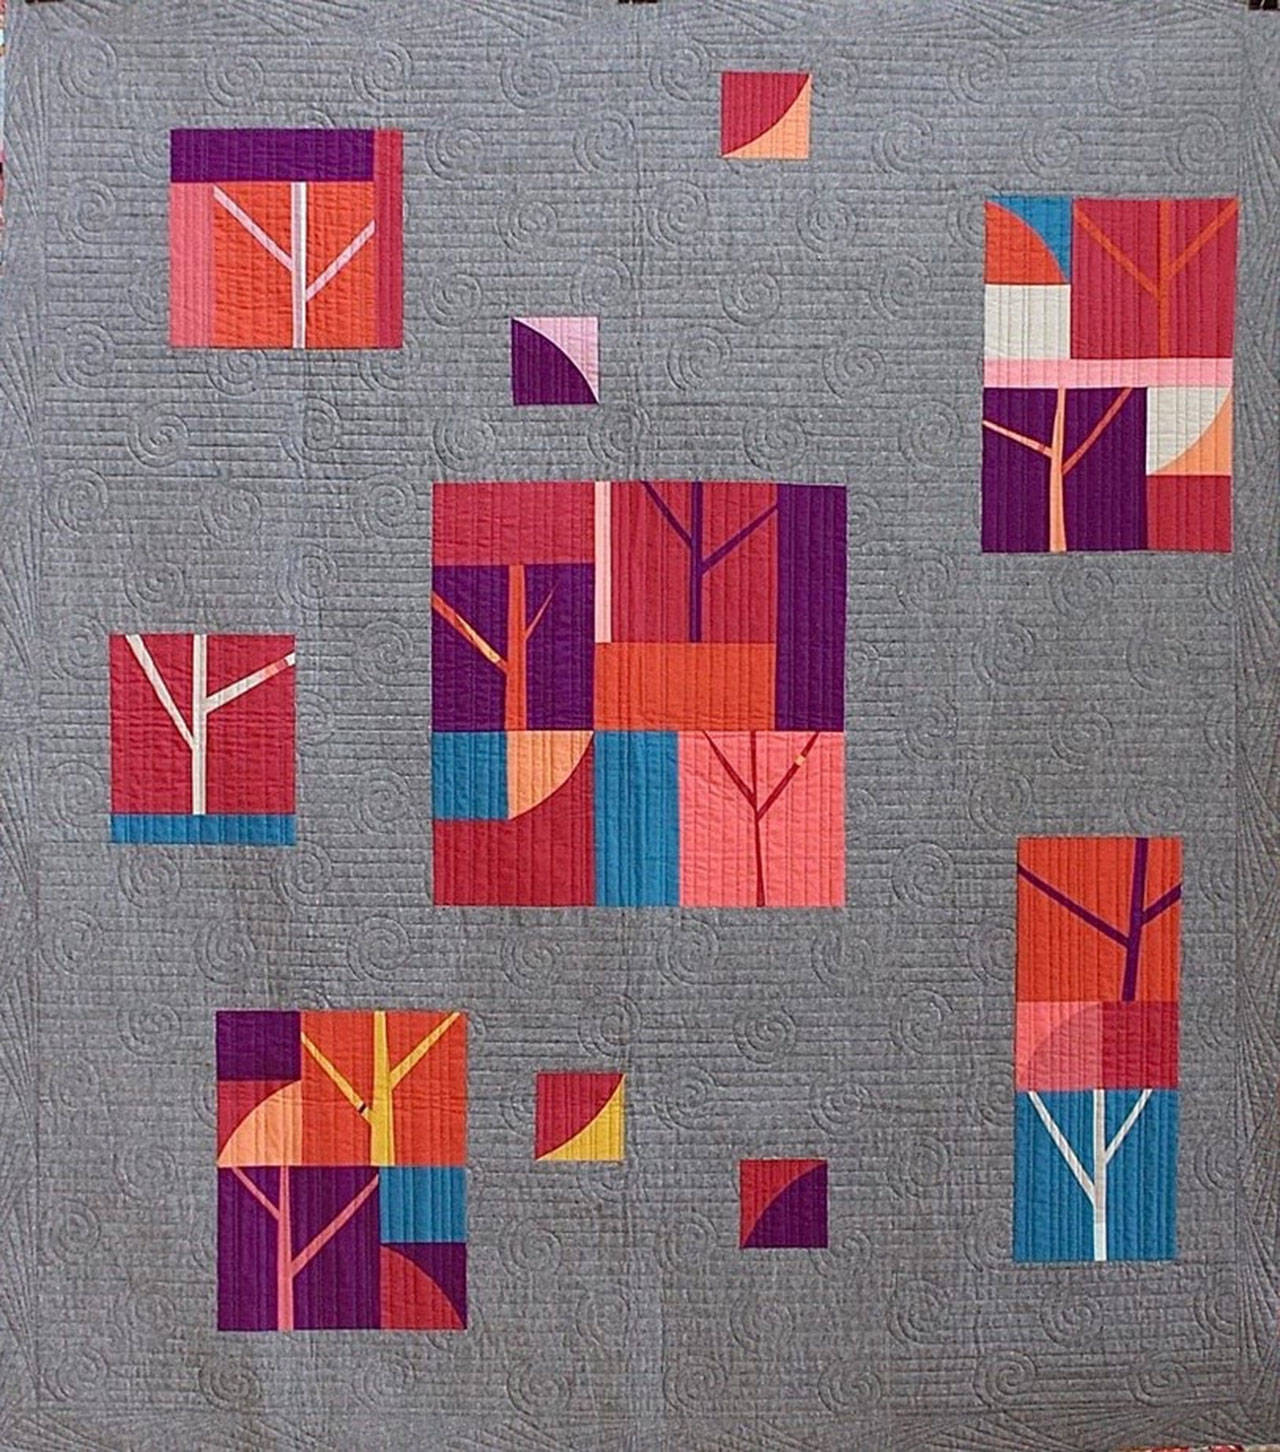 Image courtesy of the Bainbridge Island Modern Quilt Guild | “Northwest Sunset,” by Susan Smith, is the grand prize up for grabs in the raffle at this year’s Bainbridge Quilt Festival, returning to downtown Winslow Saturday, Sept. 8.